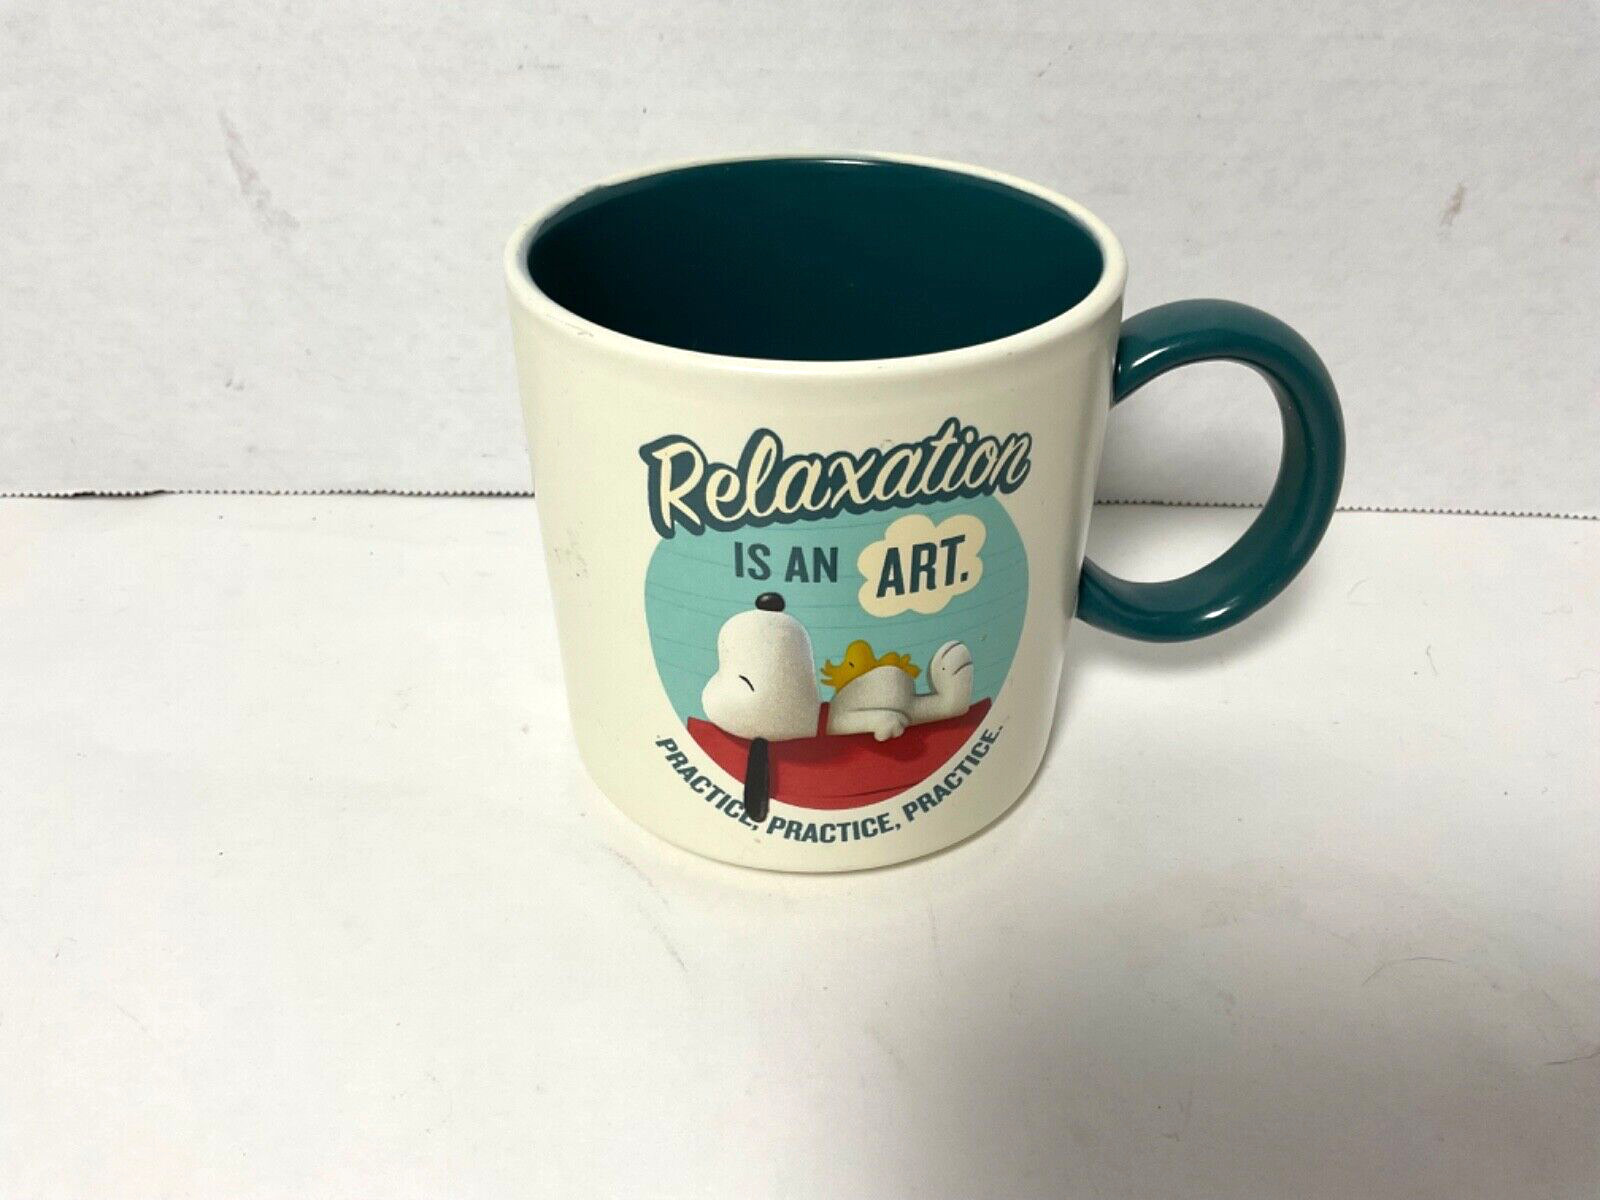 Hallmark The Peanuts Movie Coffee Mug Relaxation Is An Art 2015 Pre Owned